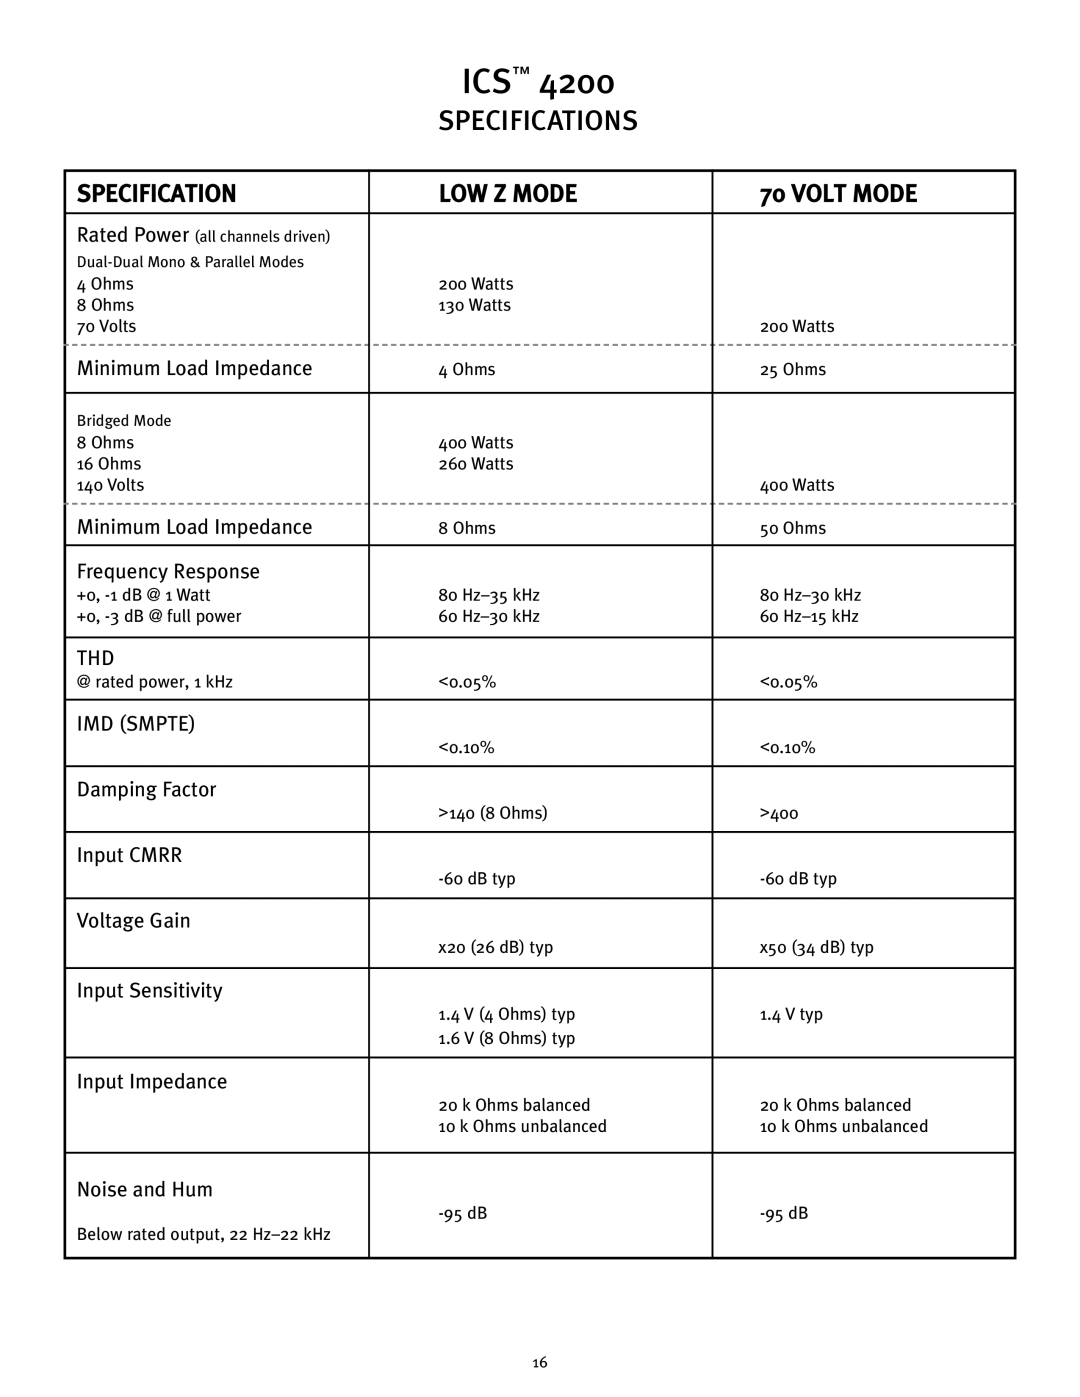 Peavey ICS 4200 user manual Specifications, Low Z Mode, Volt Mode 